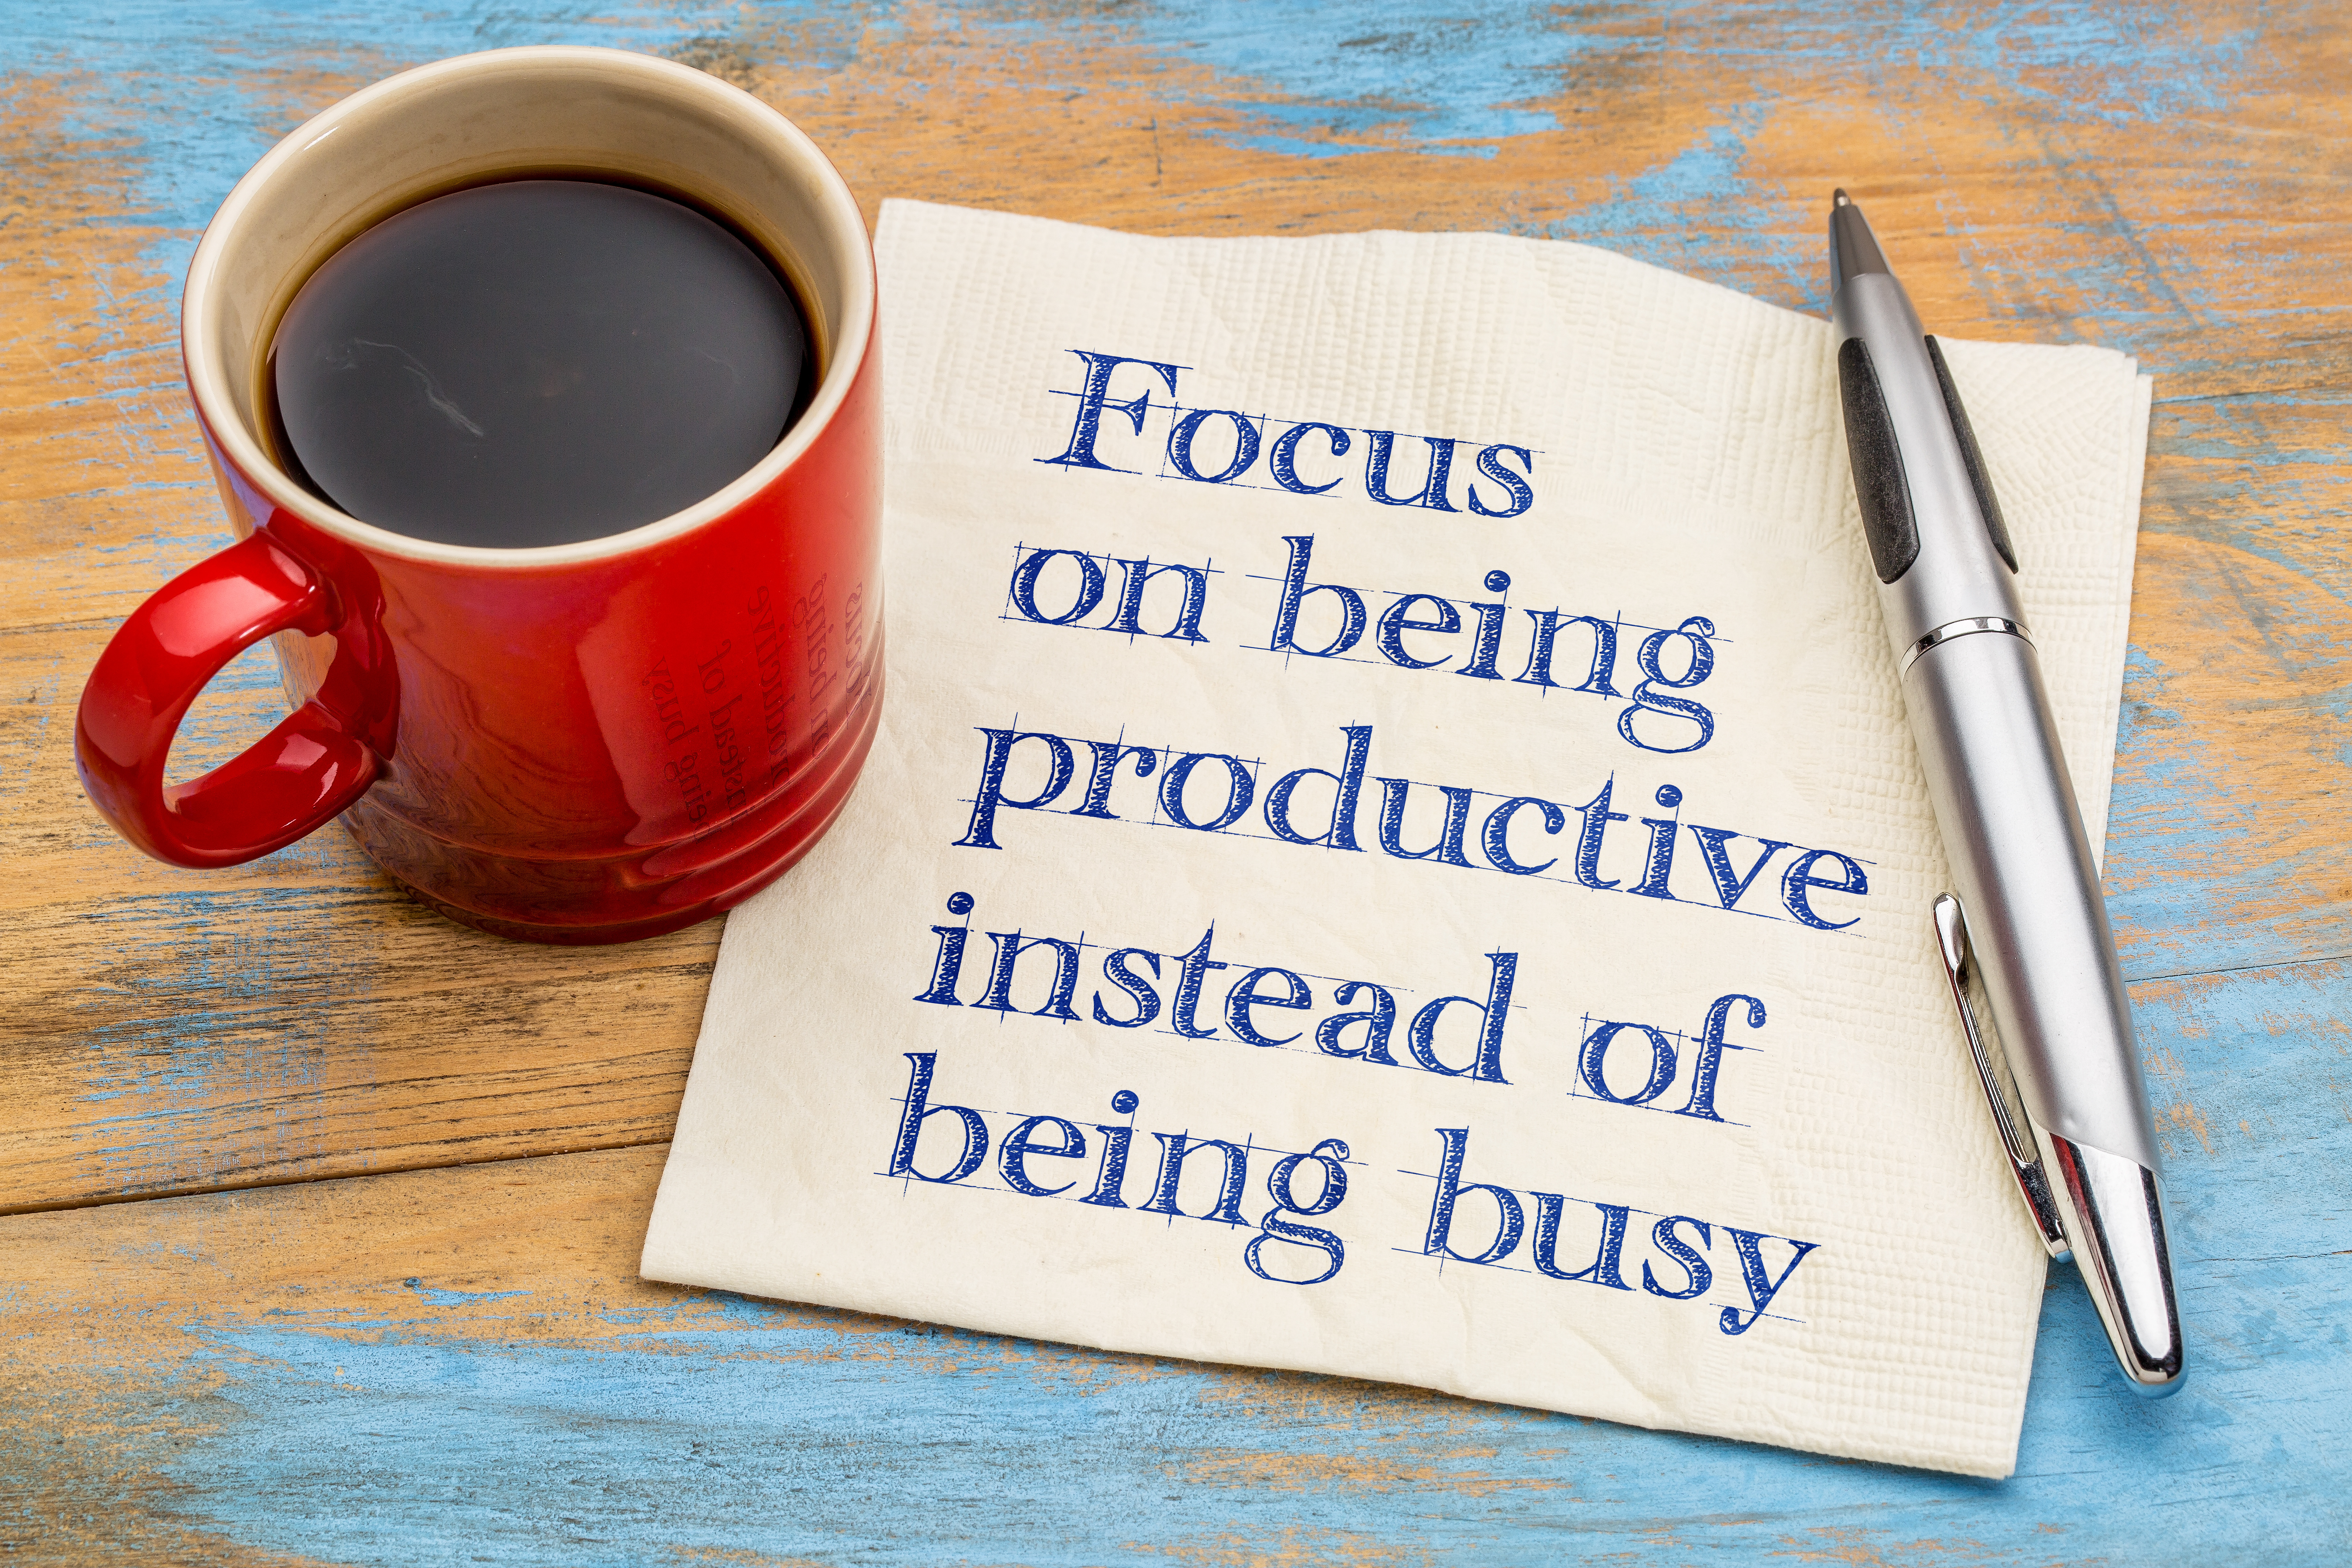 Focus on being productive instead of being busy - handwriting on a napkin with a cup of espresso coffee